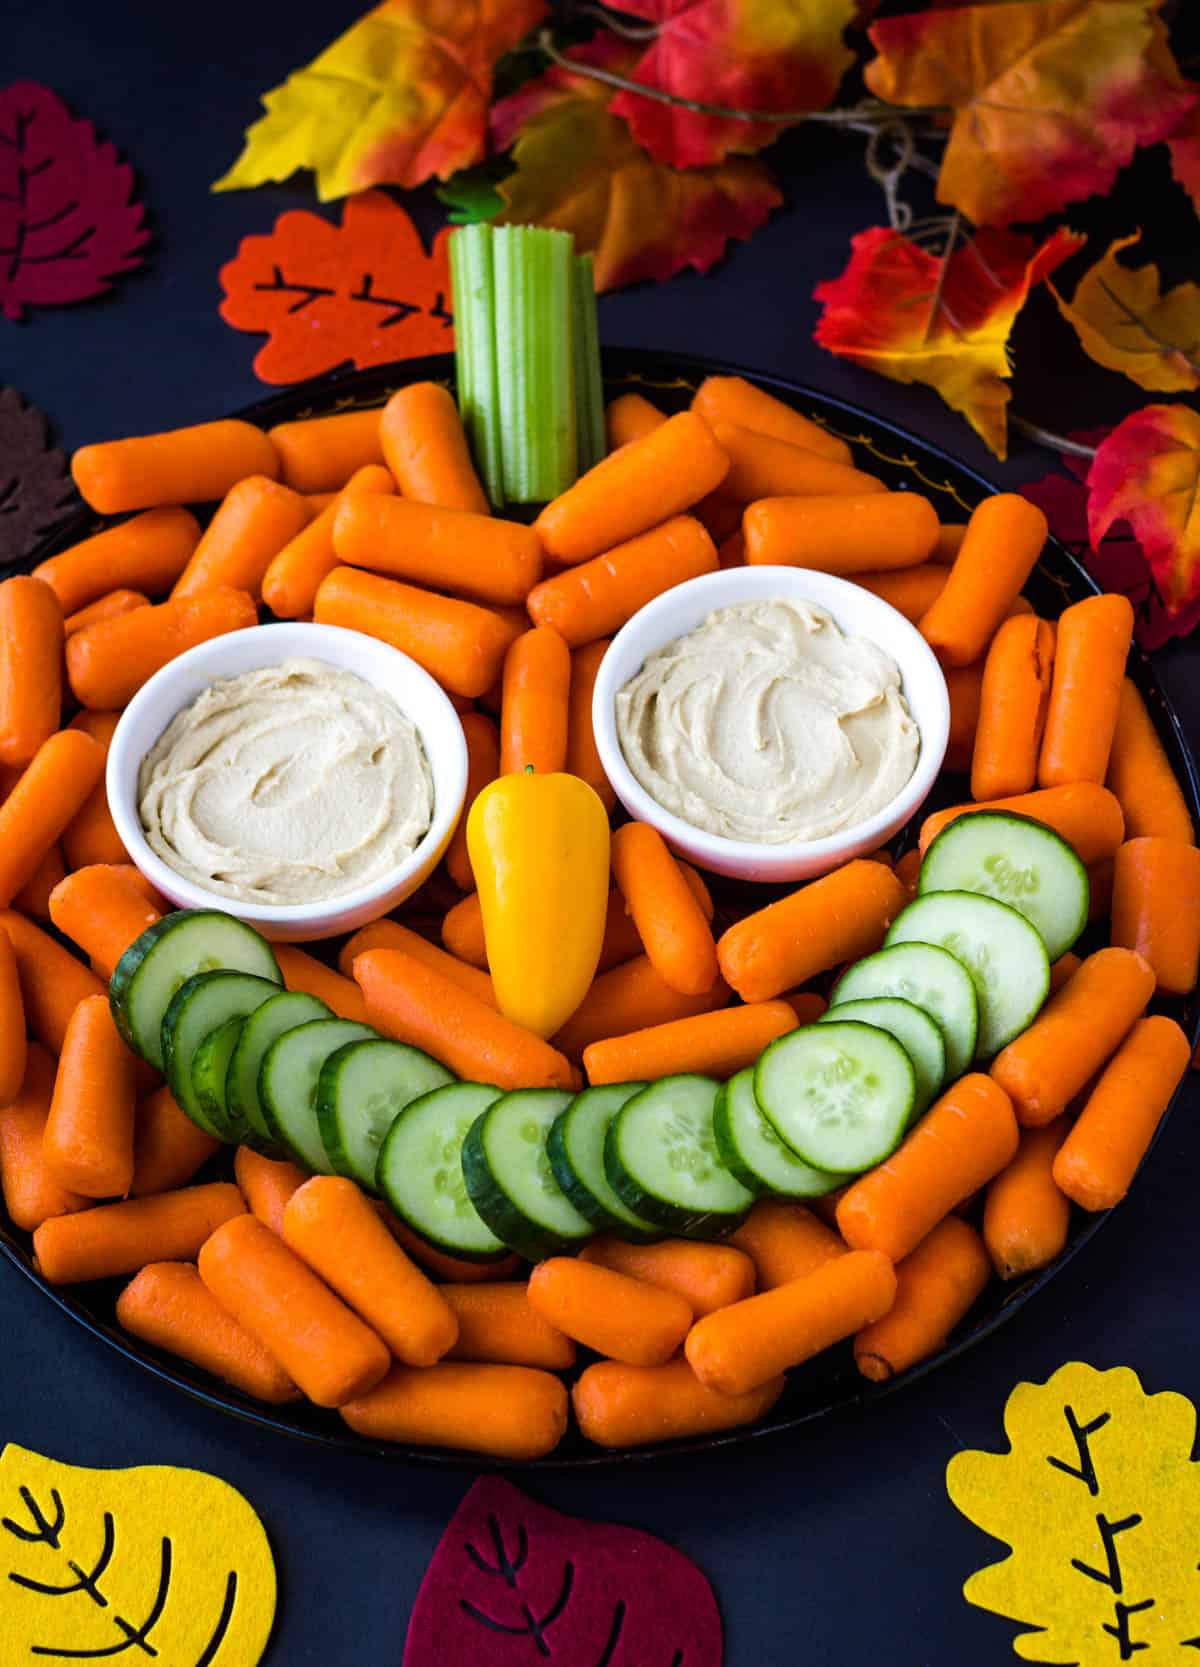 pumpkin face veggie tray surrounds by fall leaves